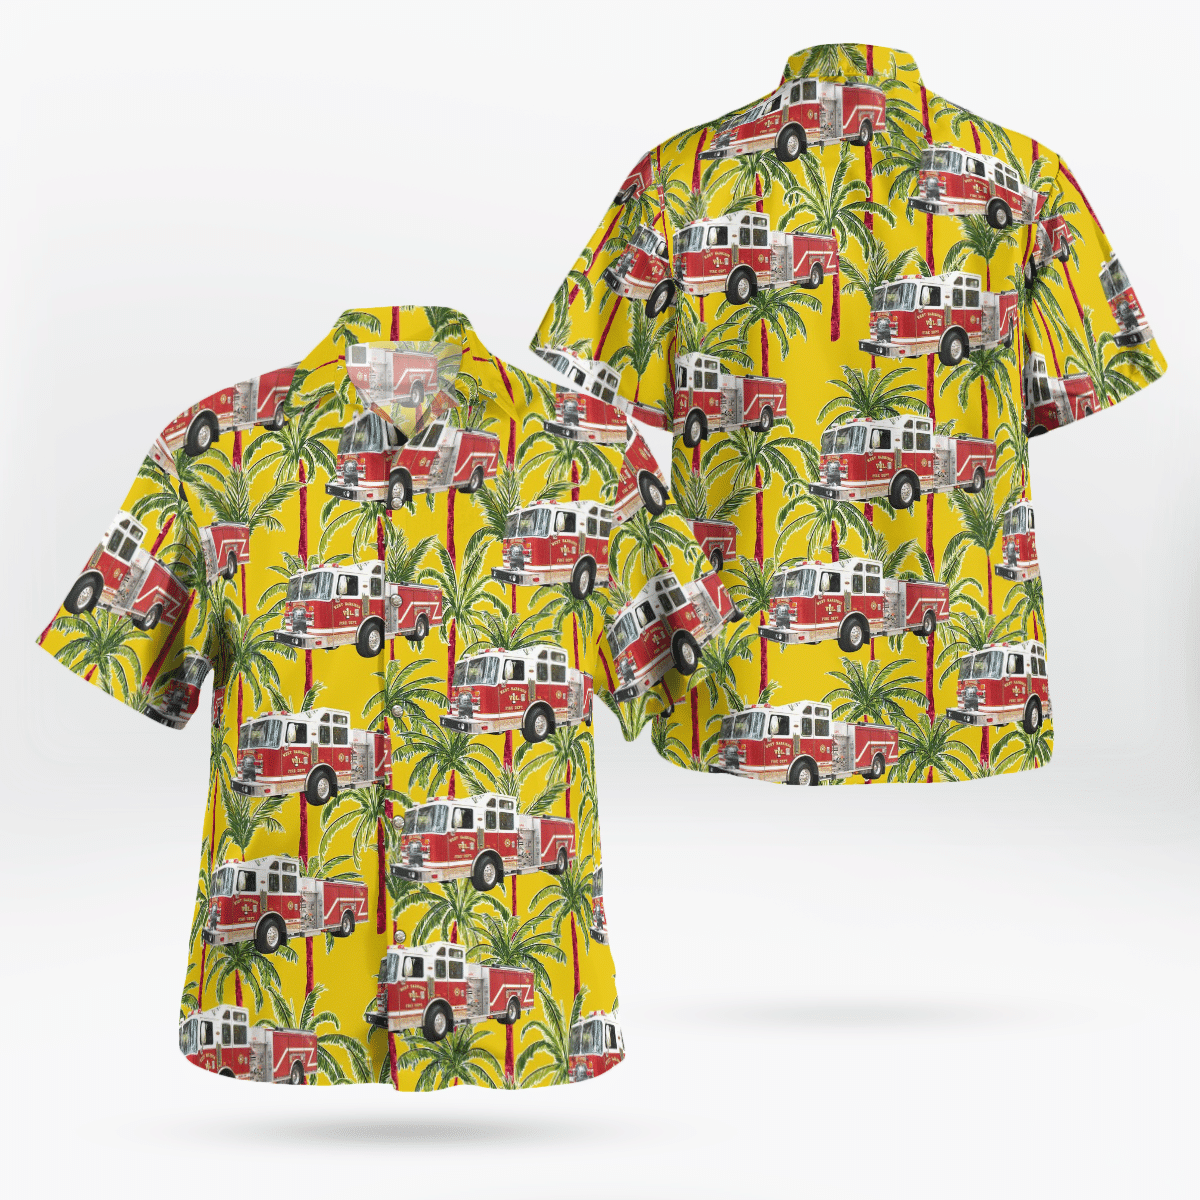 If you want to be noticed, wear These Trendy Hawaiian Shirt 84